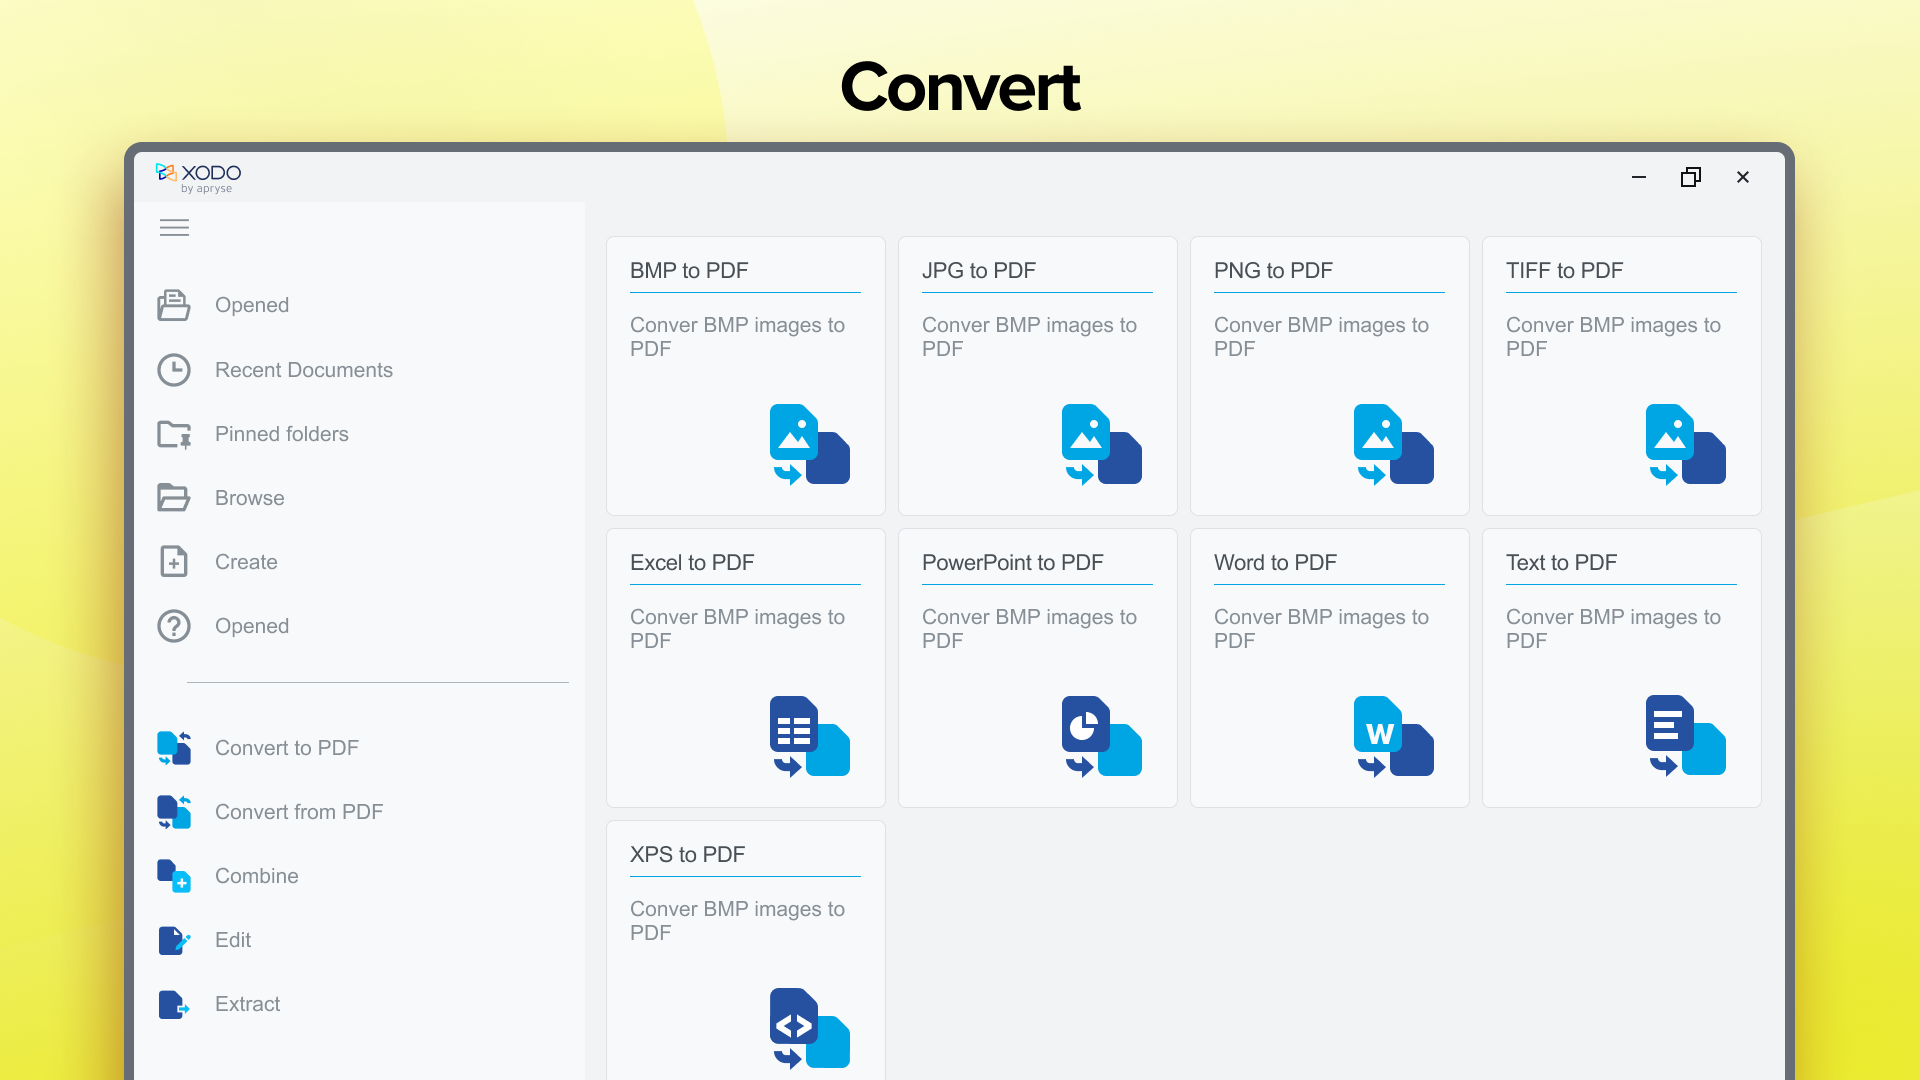 Convert multiple file formats to/from PDF like Word, PowerPoint, Excel, Images, HTML, and much more!